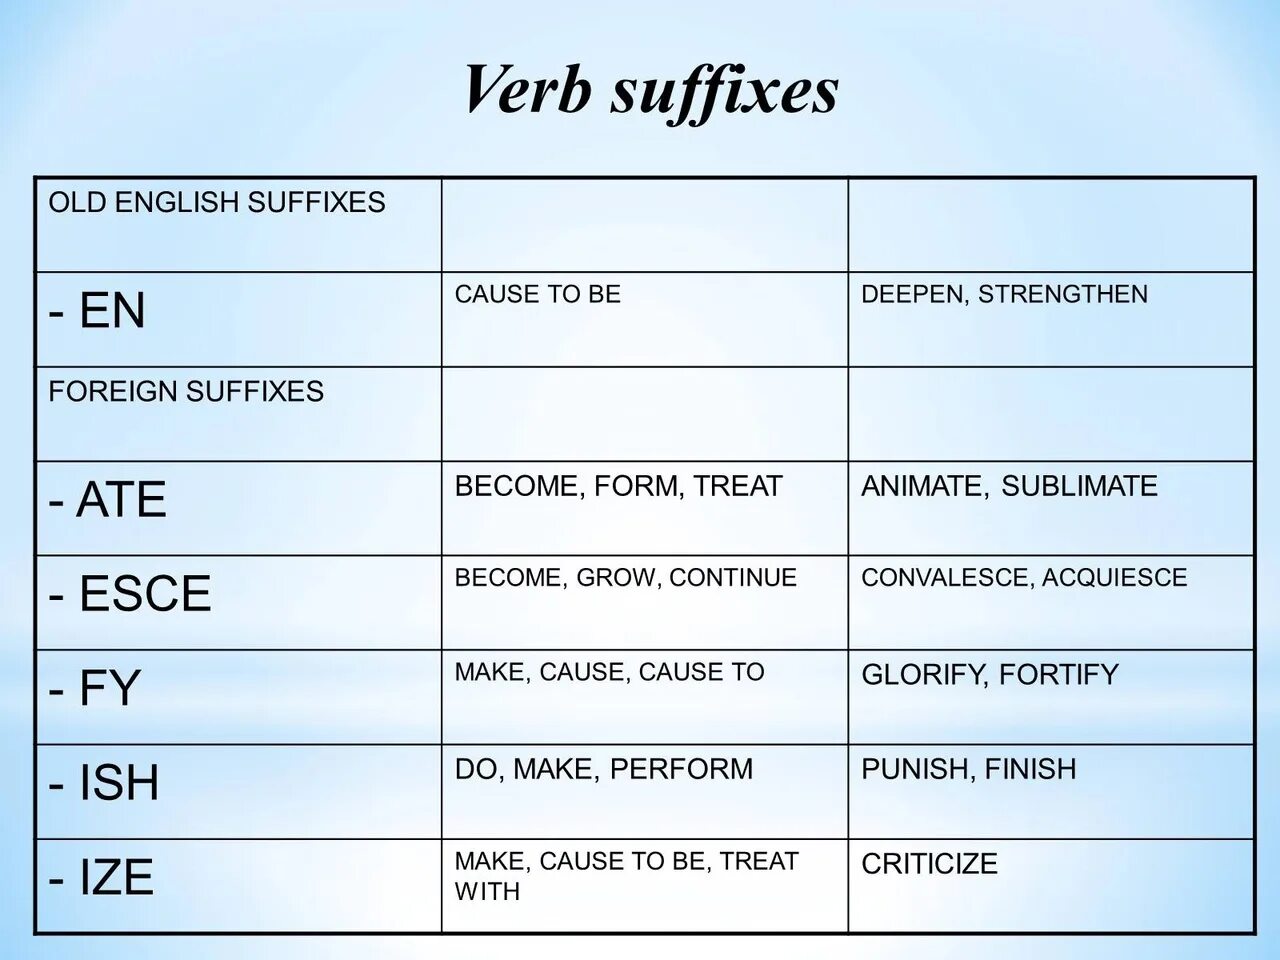 Word formation form noun with the suffixes. Suffixes of verbs таблица. Verb forming suffixes. Verb suffixes in English. Verbs суффиксы.